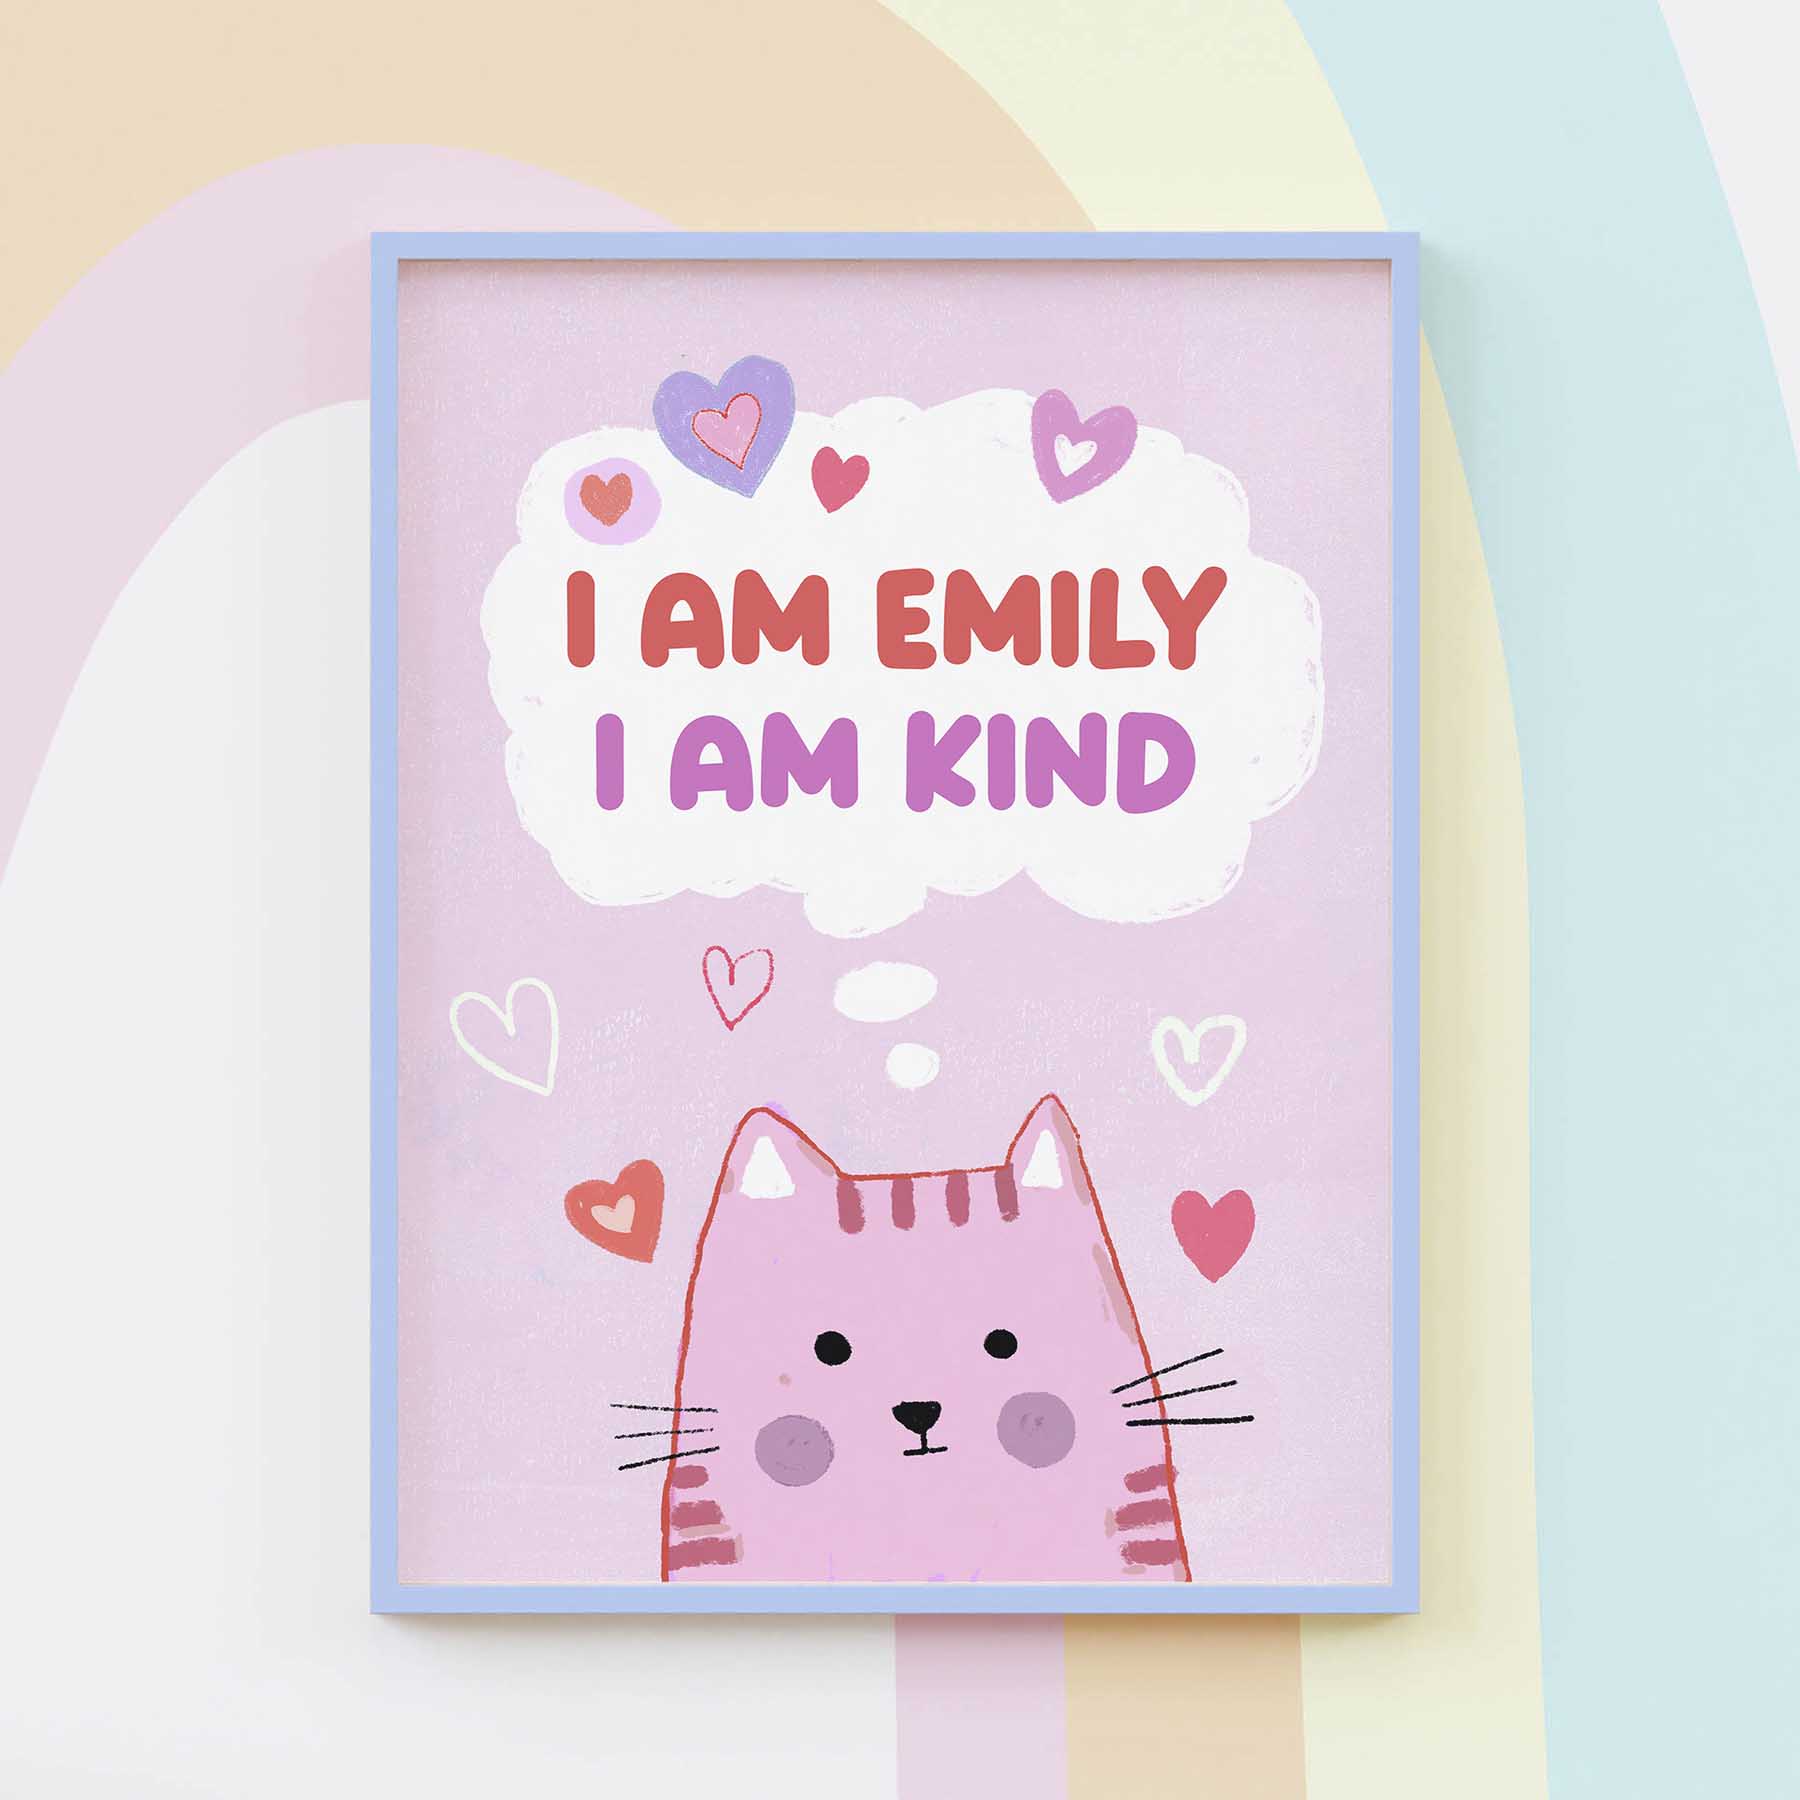 "Customizable framed kitty art with cheerful affirmations, enhancing baby and children's decor."